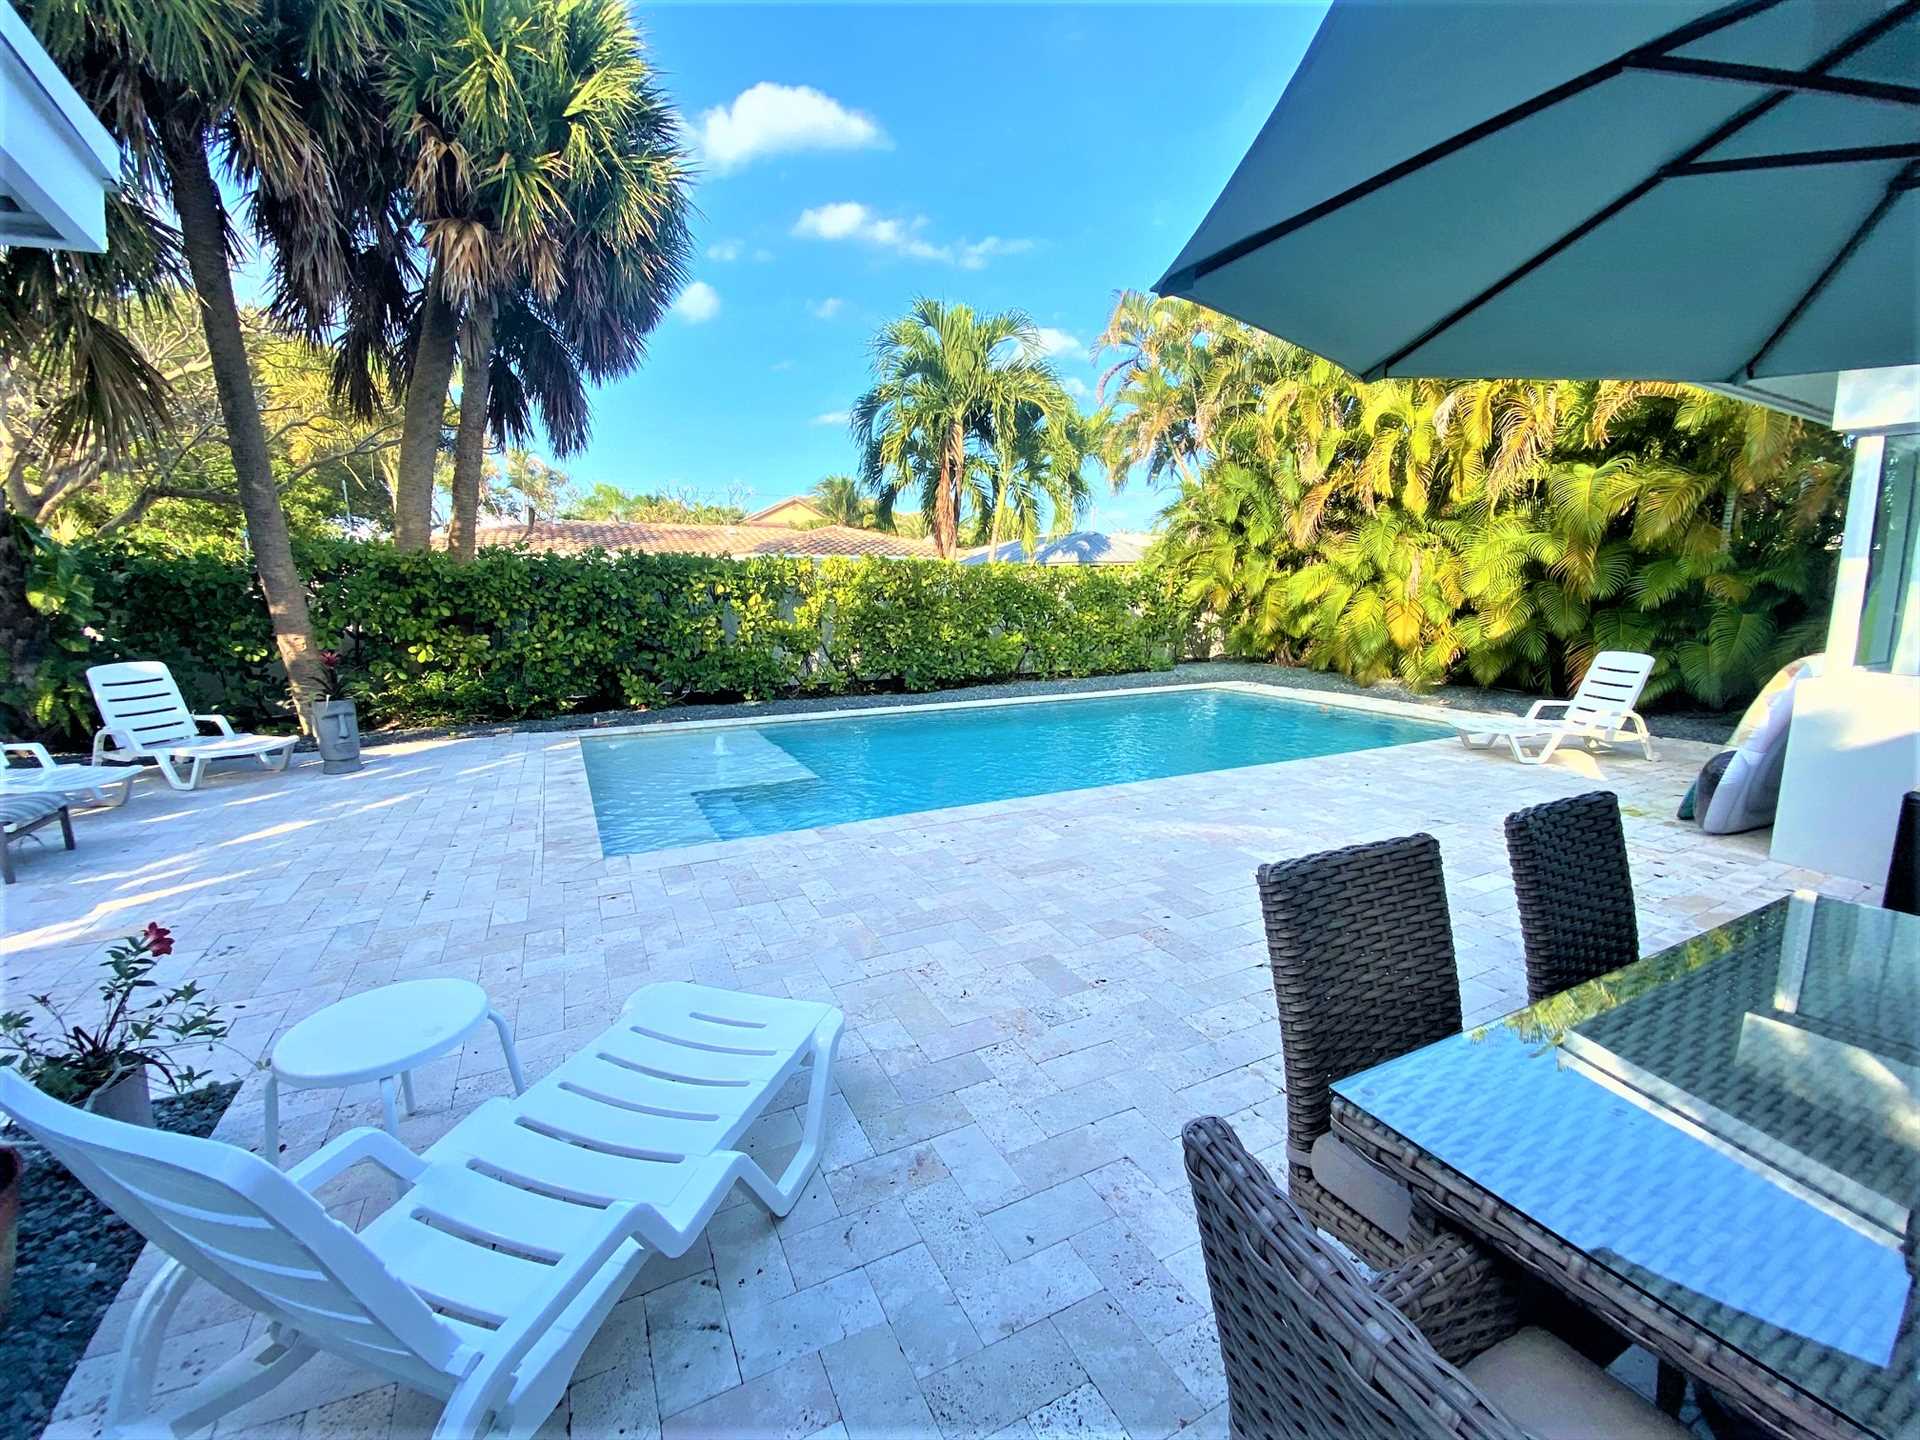 The pool deck is surrounded by a backyard six foot privacy f